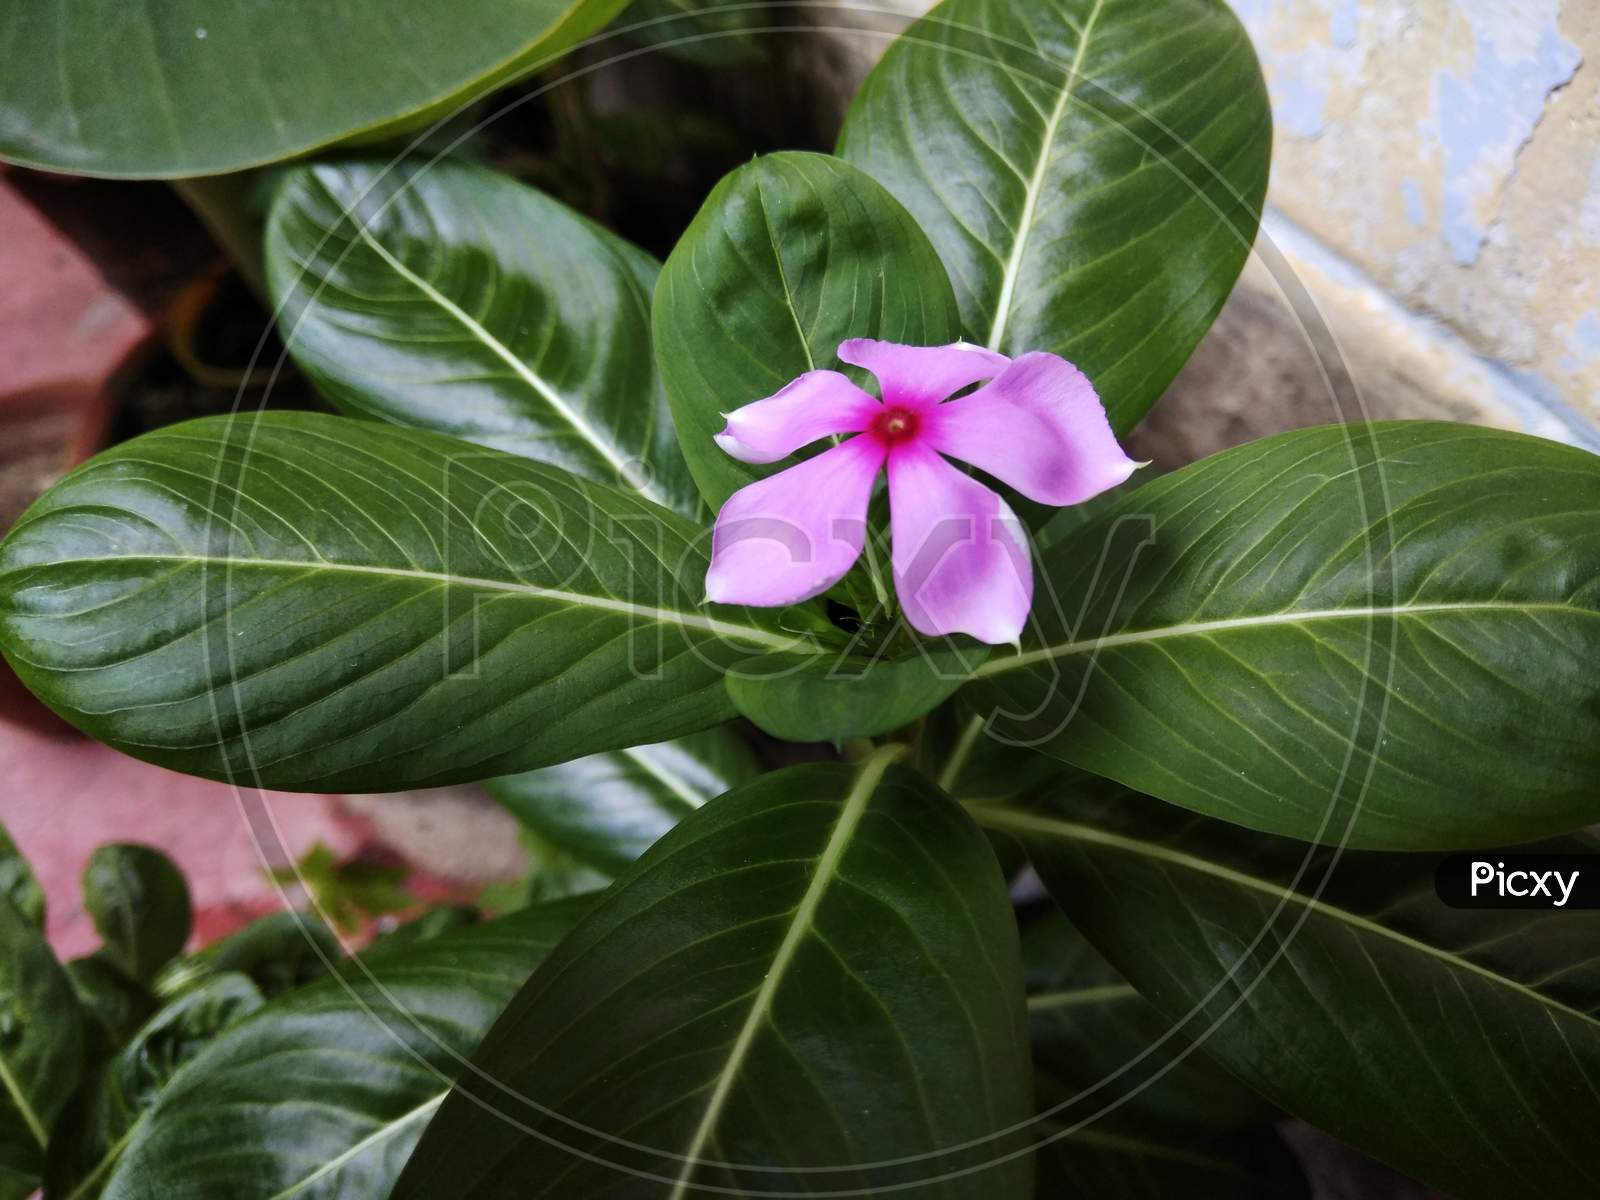 Catharanthus roseus, commonly known as bright eyes, Cape periwinkle, graveyard plant, Madagascar periwinkle, old maid, pink periwinkle, rose periwinkle, is a species of flowering plant